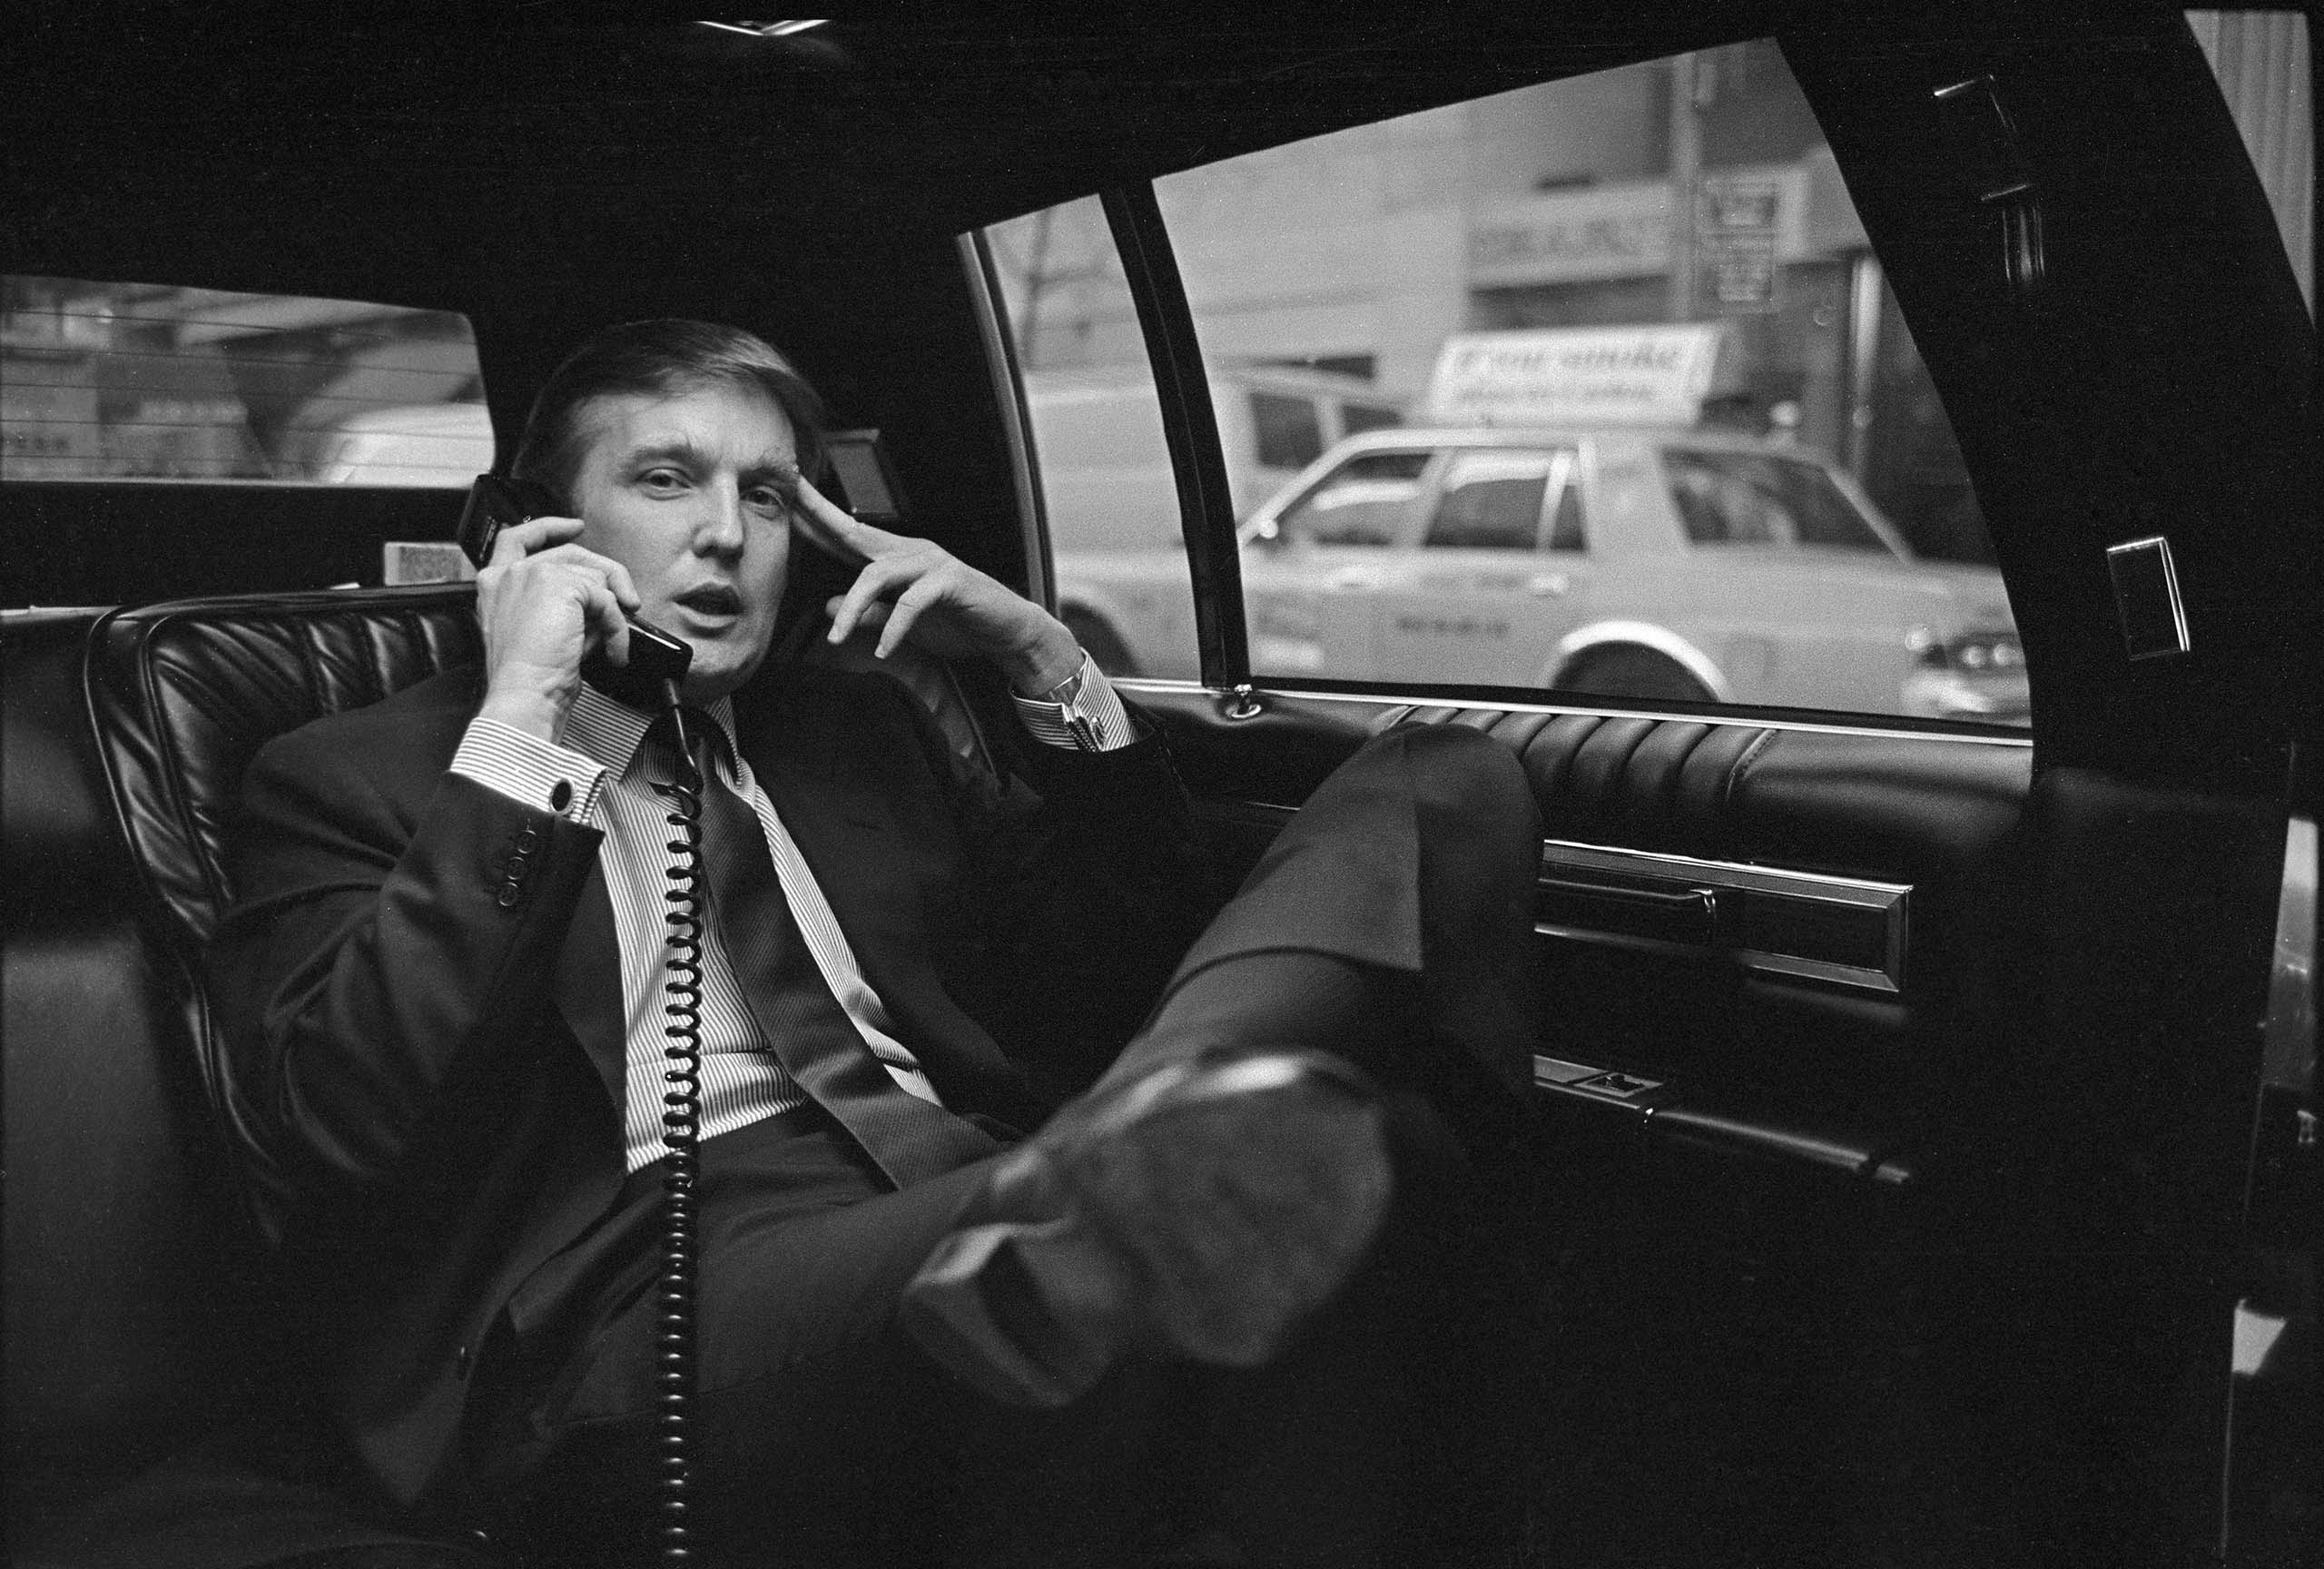 Donald Trump on the phone in his car